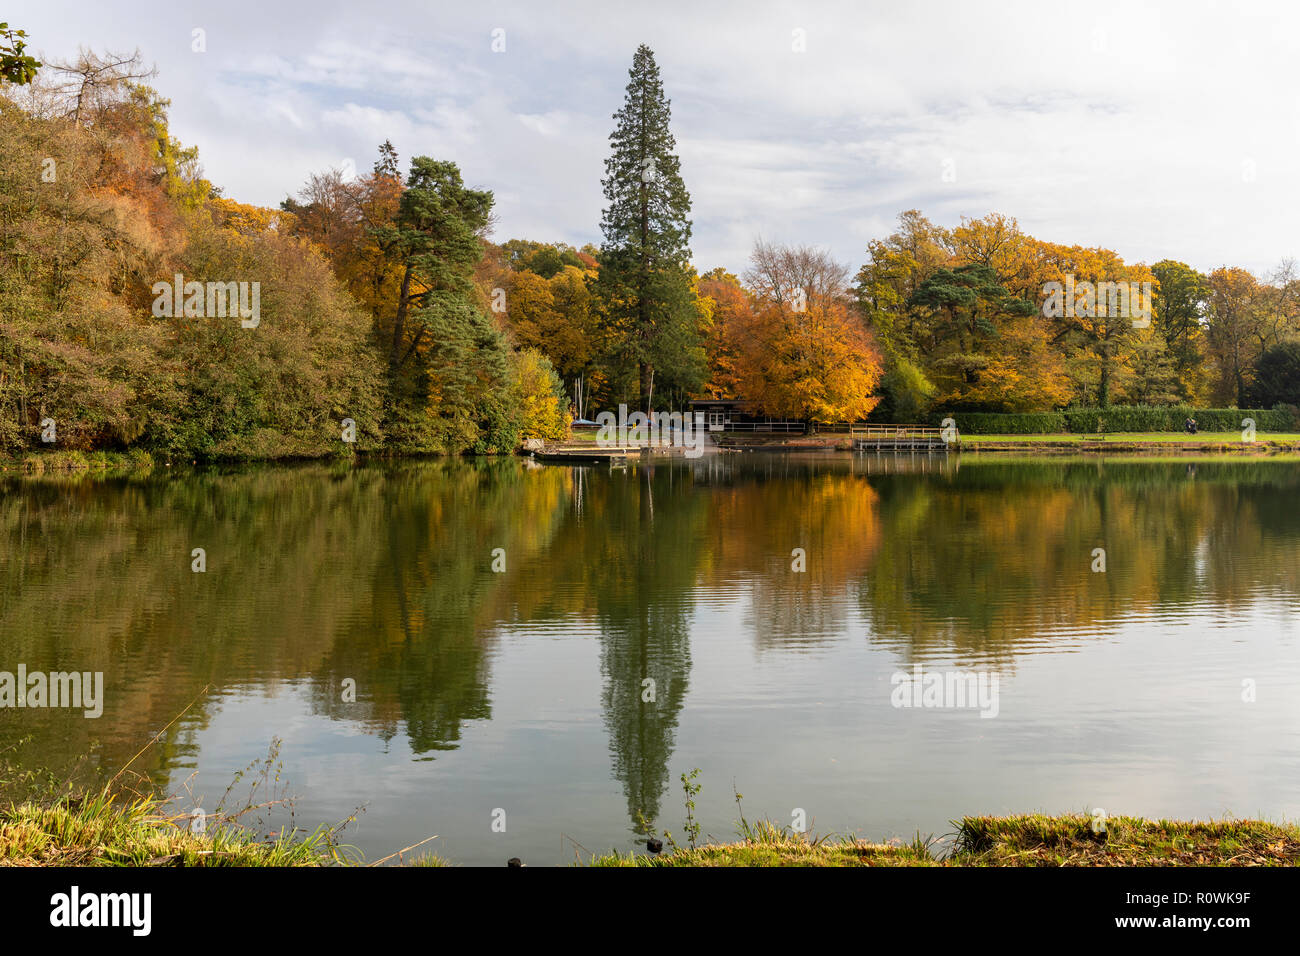 Autumn reflections in the water from the trees around Shearwater lake, The Longleat Estate, Wiltshire, England, UK Stock Photo